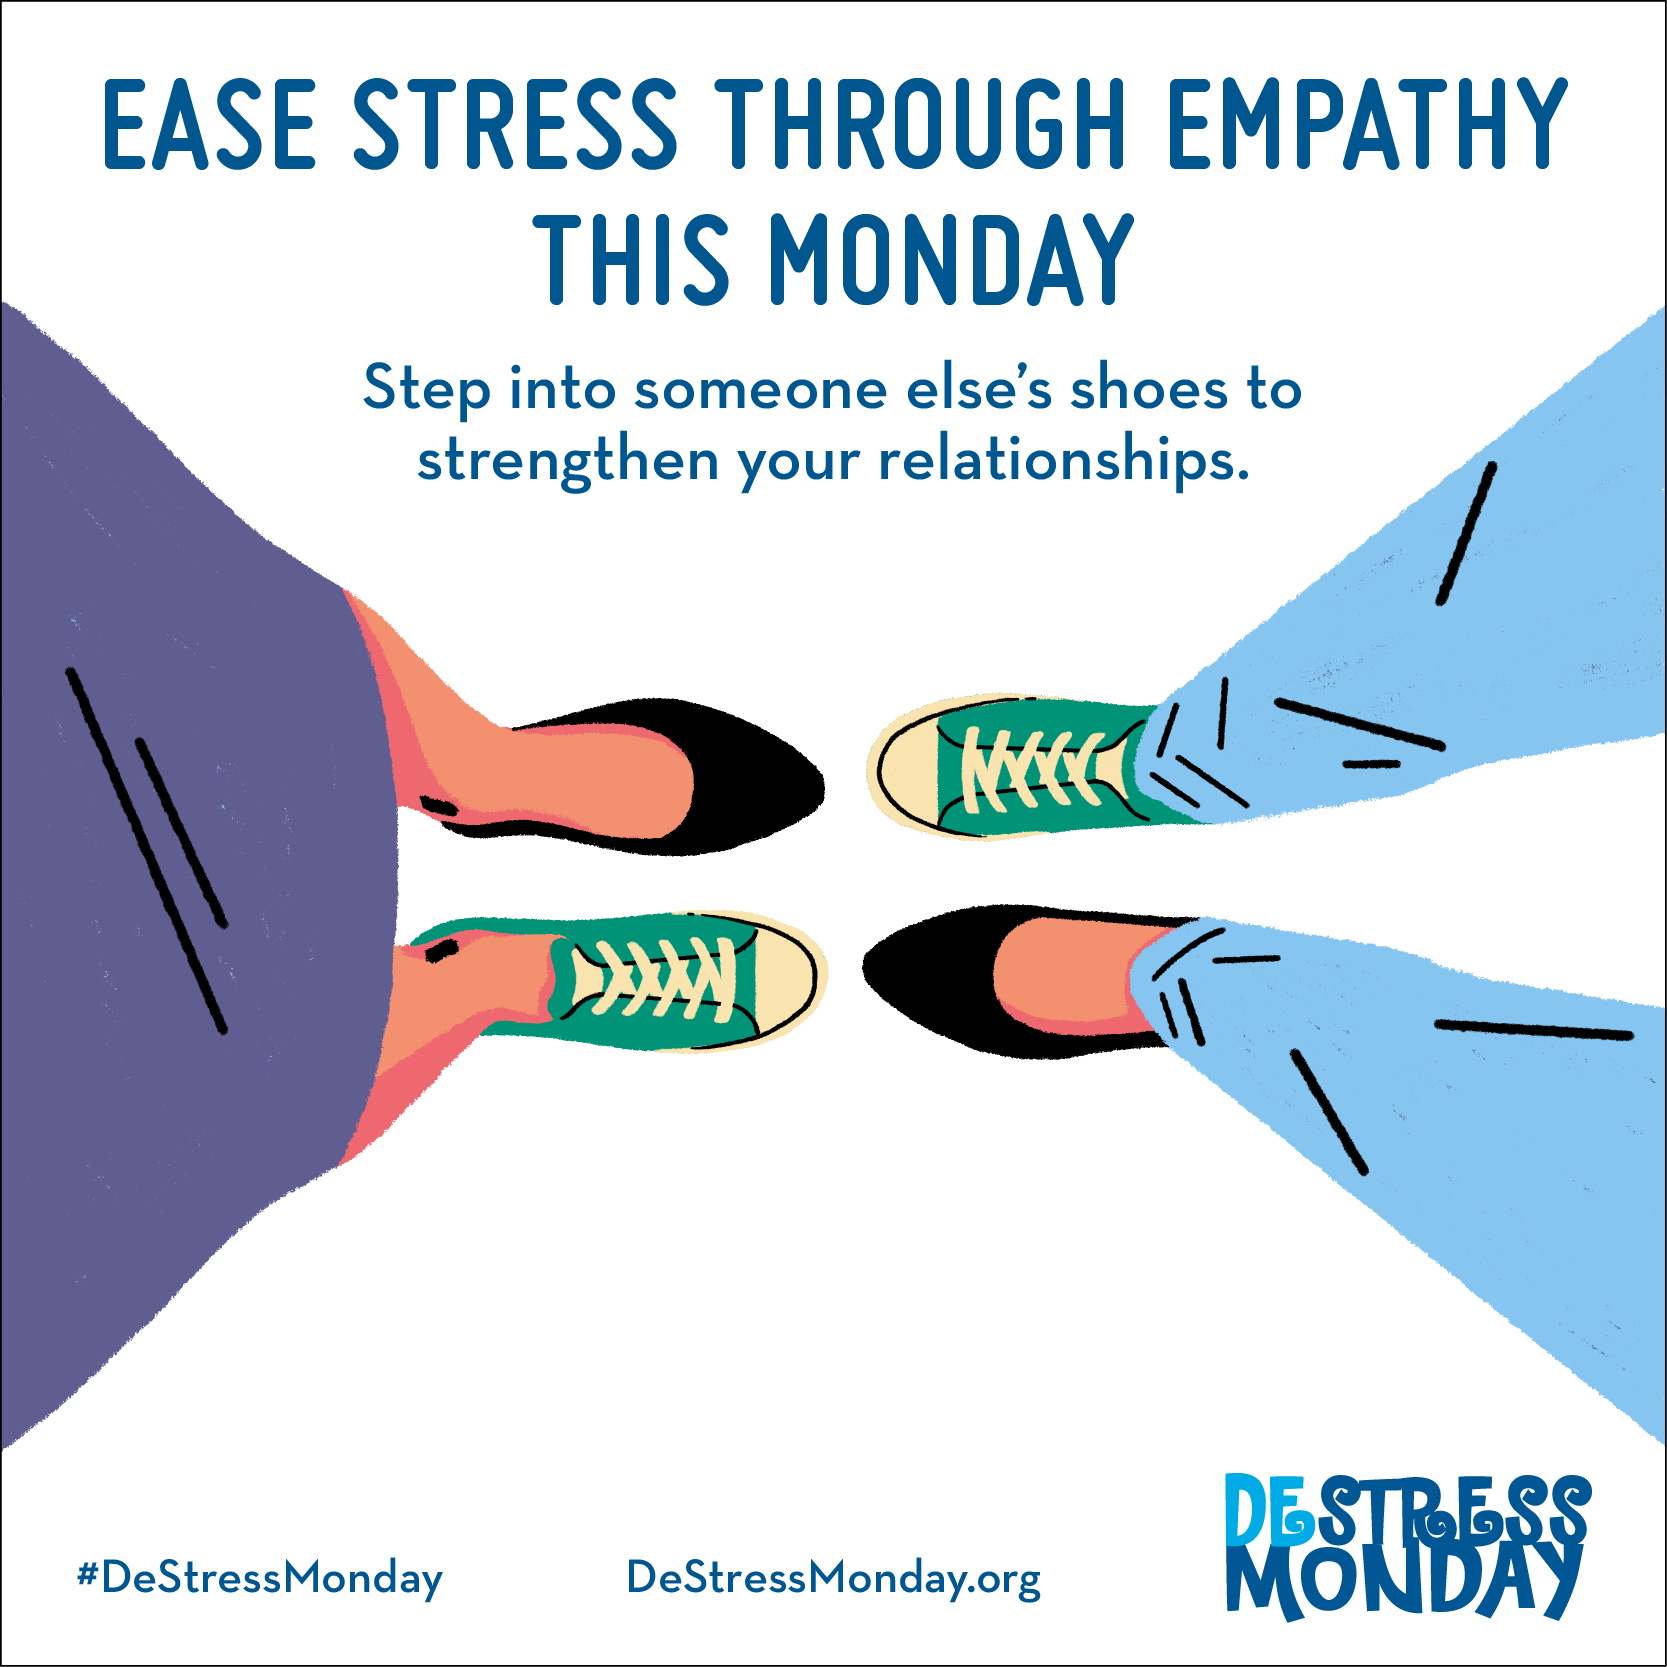 Ease stress through empathy this Monday. Step into someone else's shoes to strengthen your relationships.